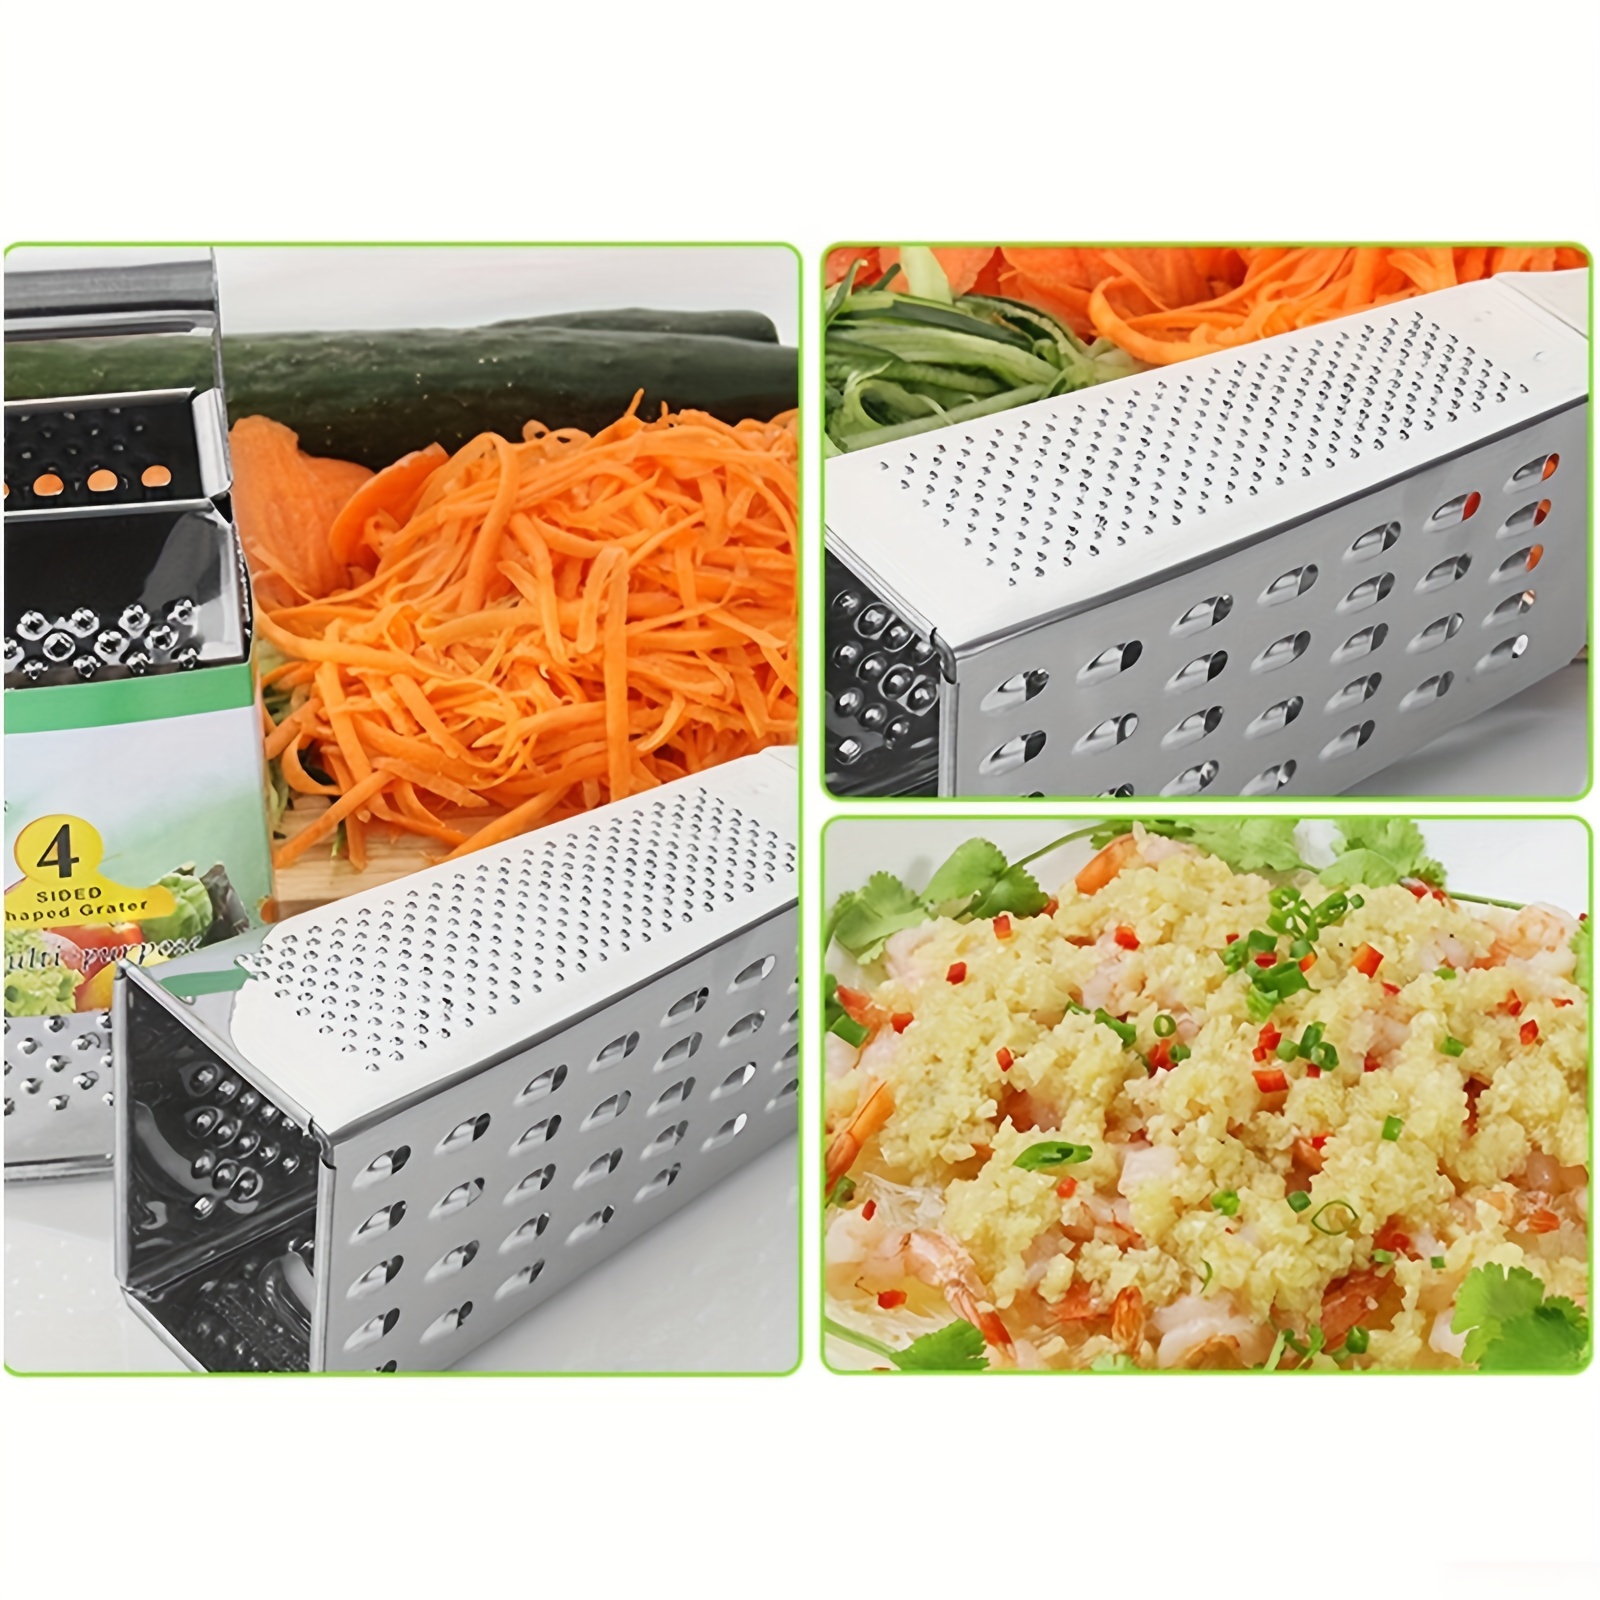 SMALL Stainless Steel Box Cheese Carrot Food Grater Shredder Hand Held easy  GRIP